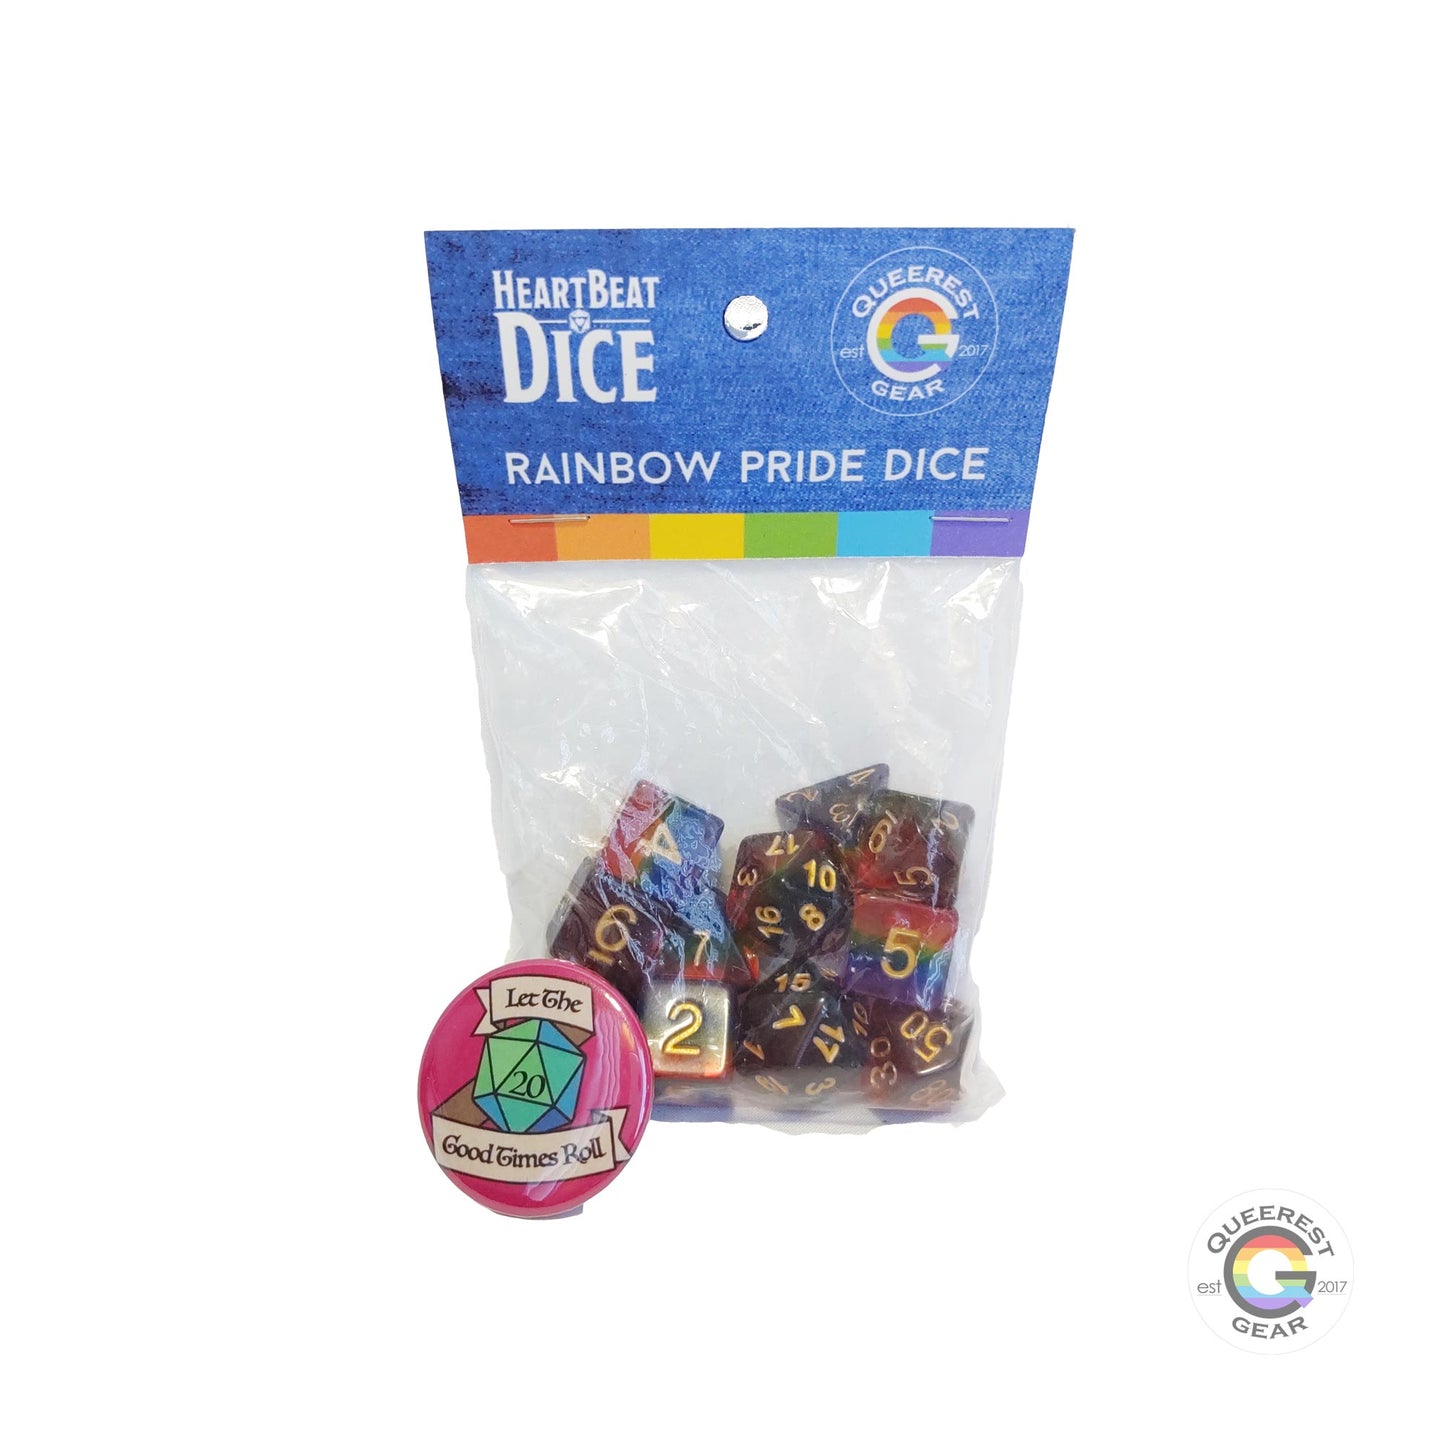  Rainbow pride dice in their packaging with a free “let the good times roll” button